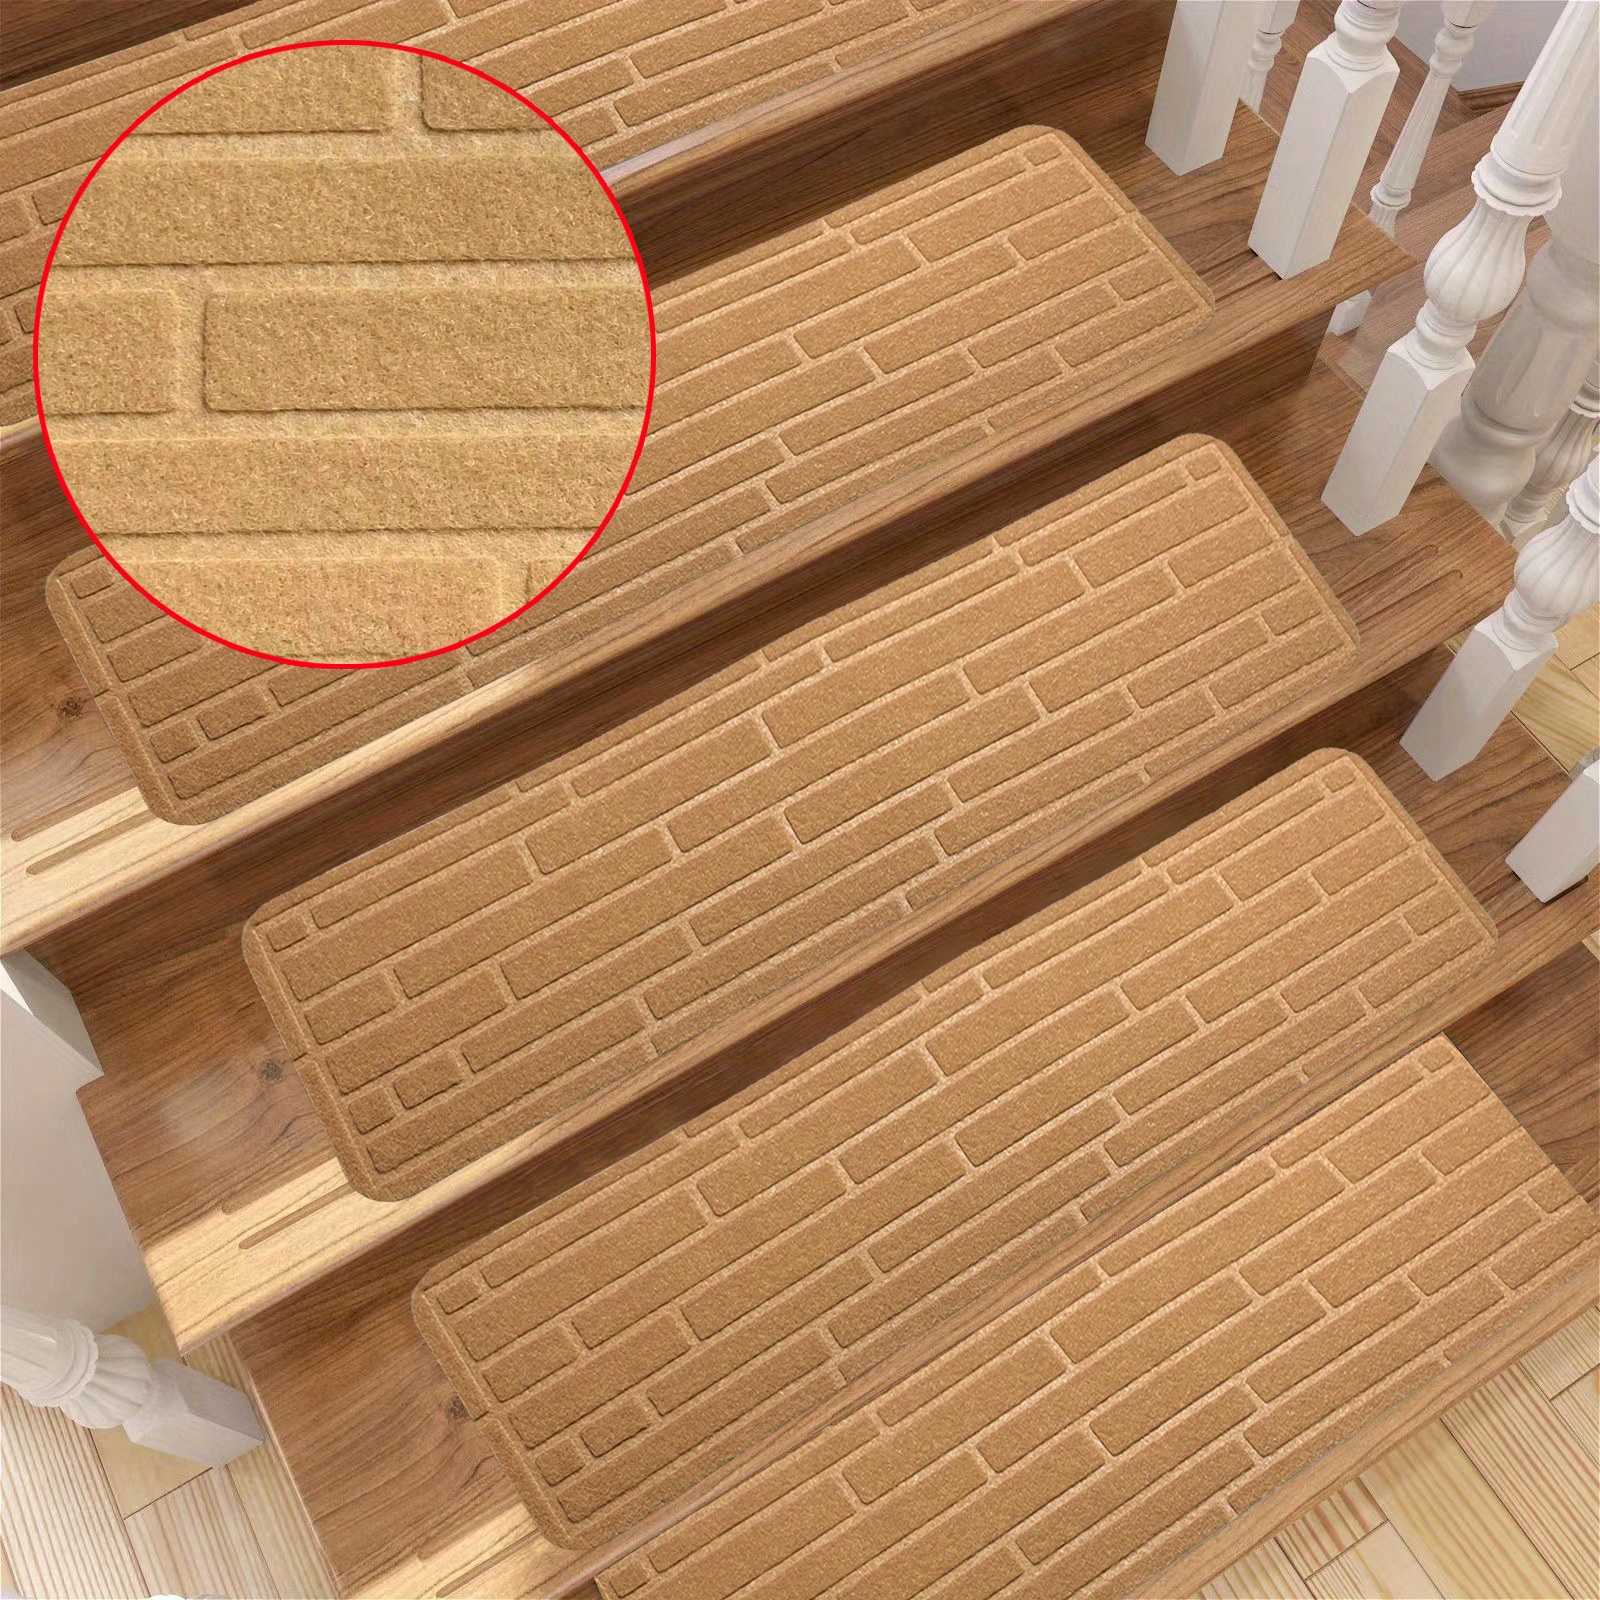 Generic OJIA Non-Slip Carpet Stair Treads for Wooden Steps Set of